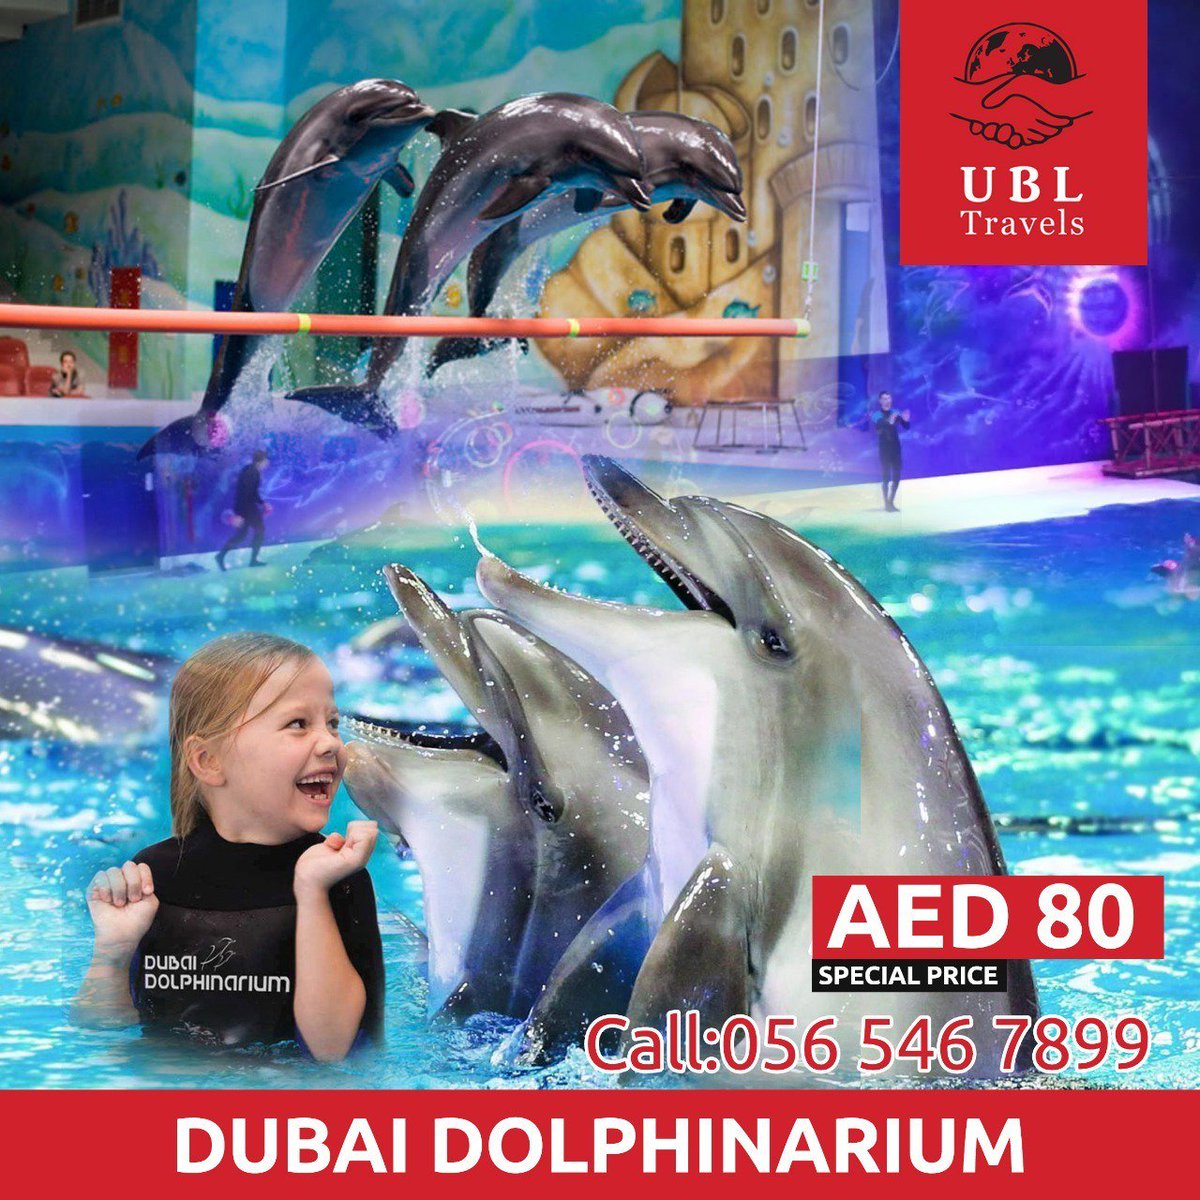 Book your Dubai Dolphinarium Ticket at a low price from UBL Travels. Enjoy these holidays with one of the most exciting Attractions in Dubai.
For more details, ubltravels.com/Dolphinarium
 #lovedubaidolphinarium #dubaidolphinarium
#dubaidolphins #dolphinshowdubai